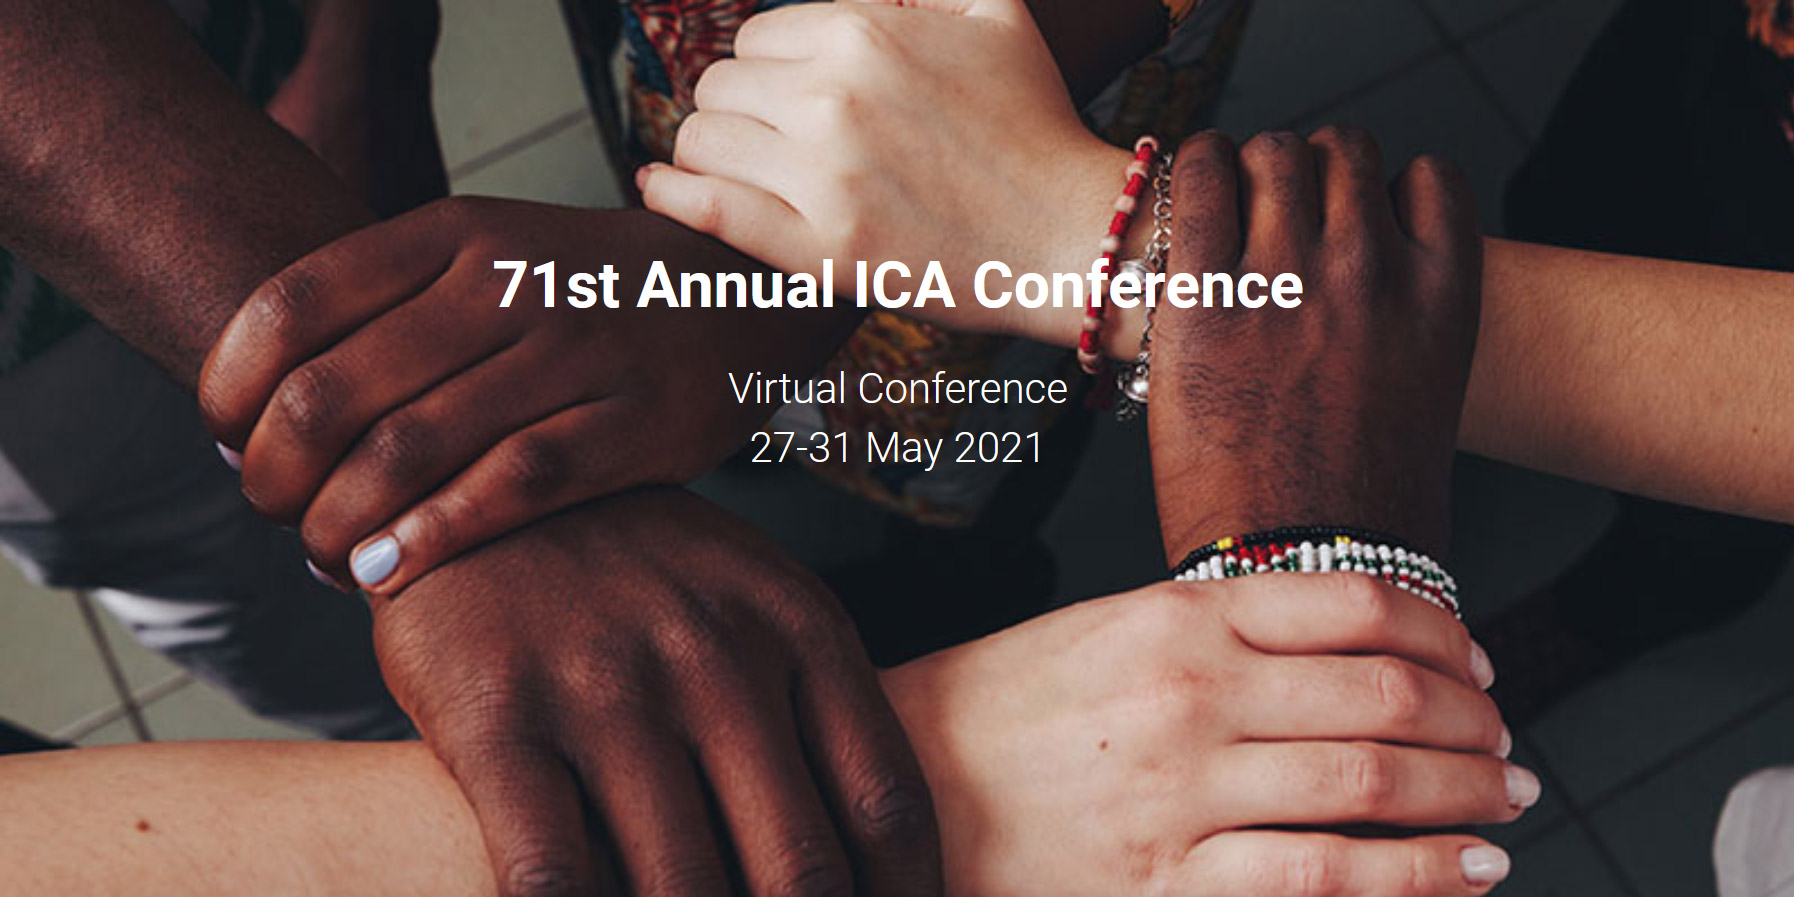 Hands of people with different skin colors form a circle. The text above reads "71st Annual ICA Conference"